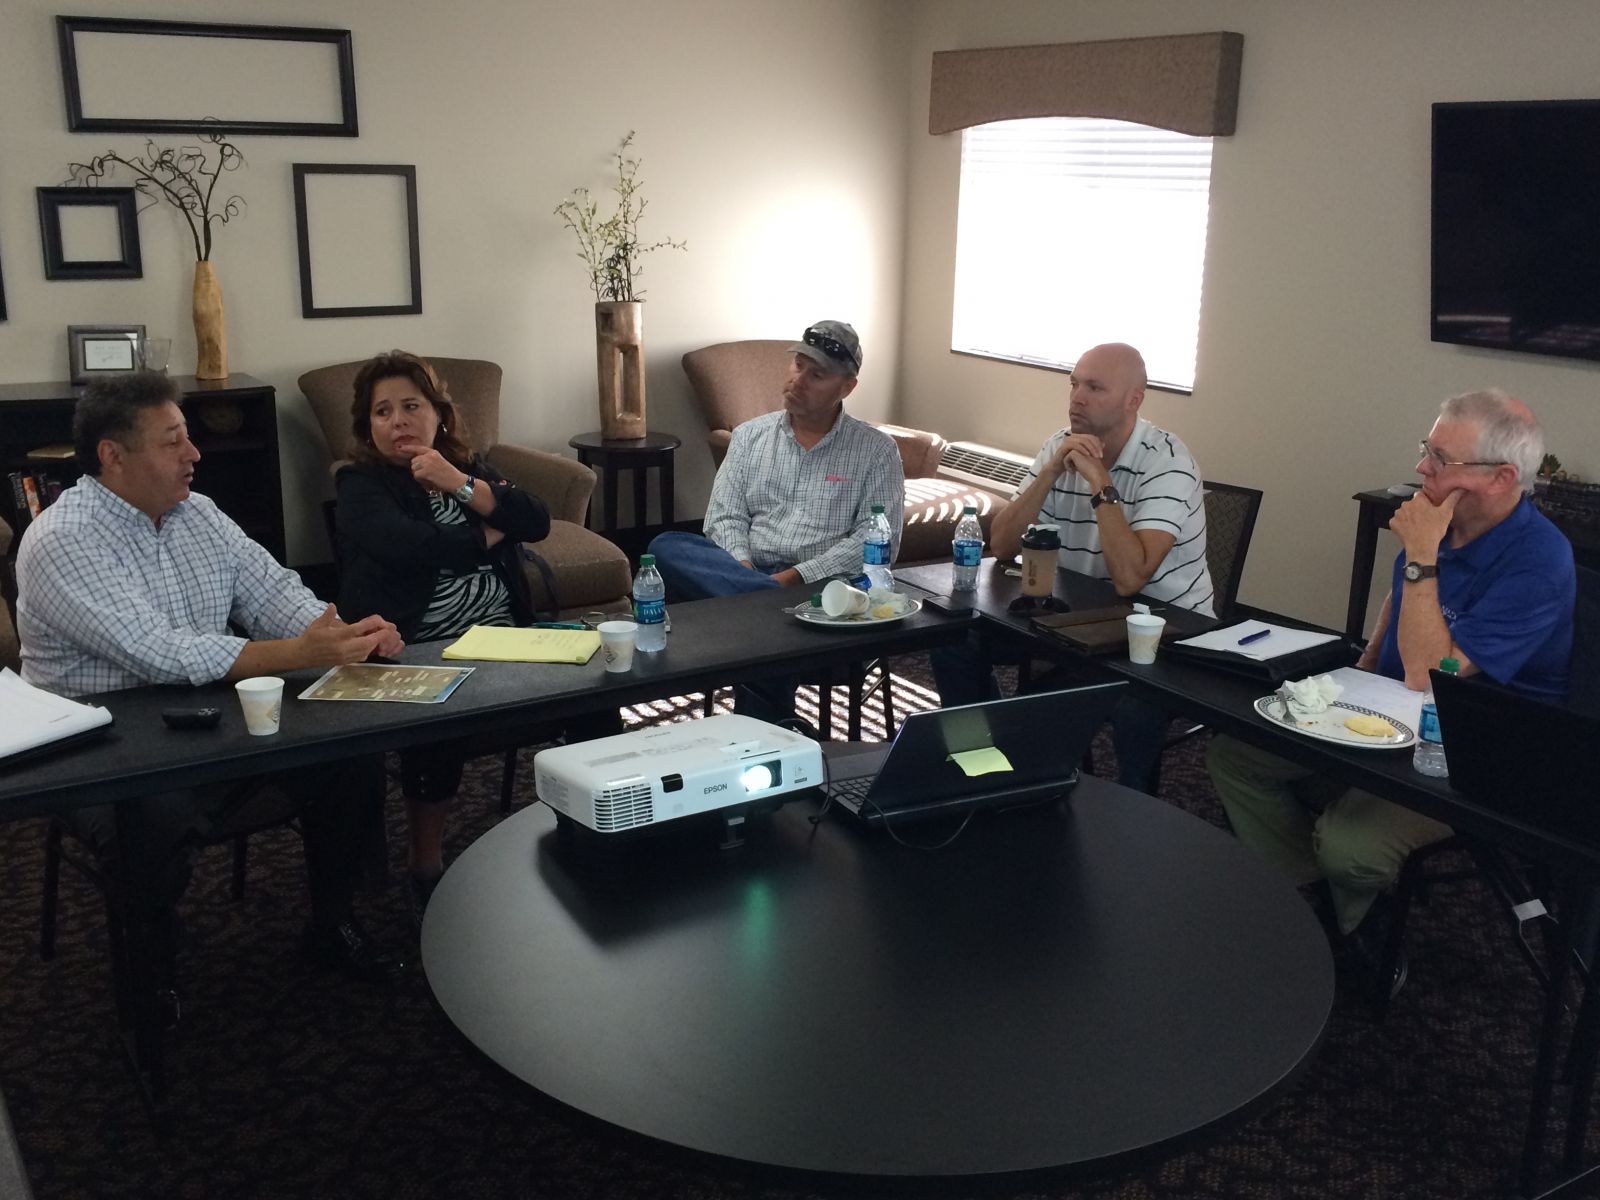 Group receives briefing by NM IBA: Left to right: Jerry Pacheco, NM IBA; Patty Lundstrom, GGEDC; Rick Murphy, GGEDC; Aaron Kowalski, Gallup Land Partners; Jeff Kiely, NWNMCOG